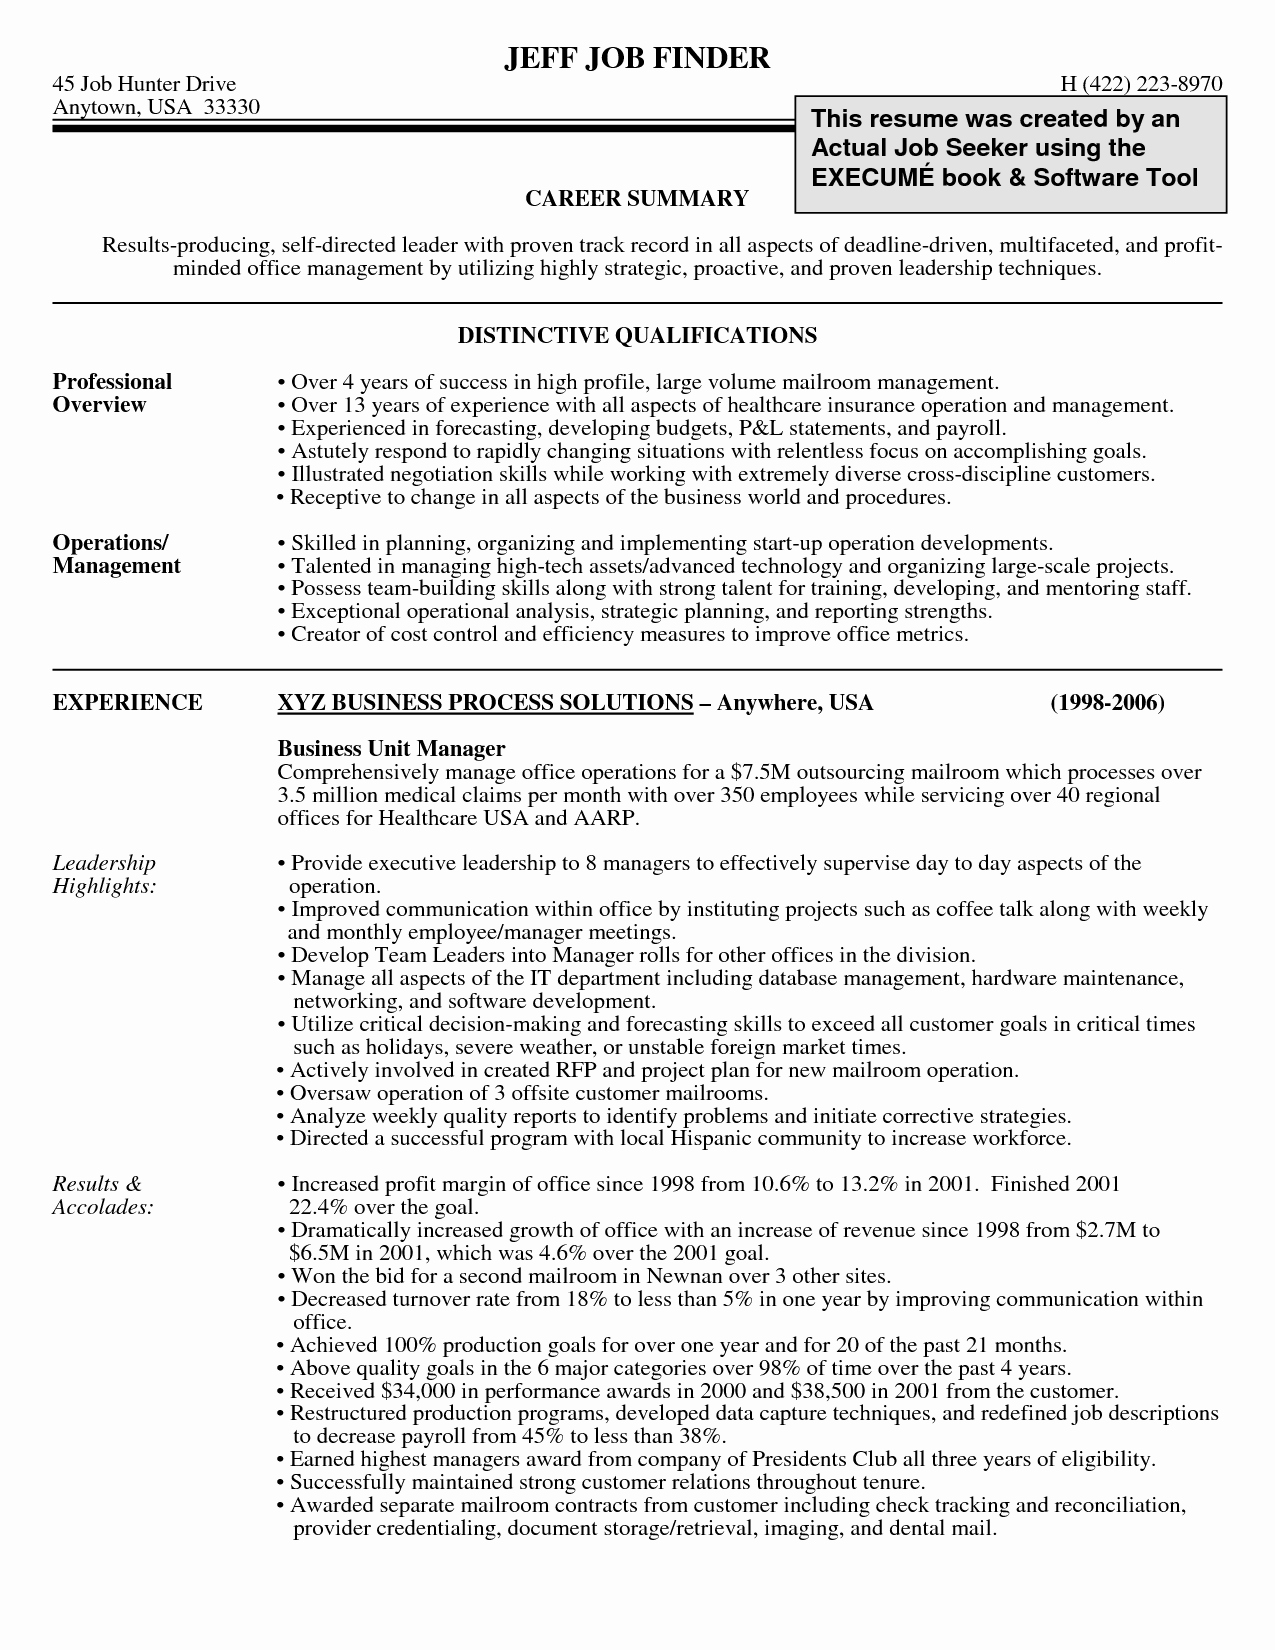 Examples Professional Summary for Resume Resume Templates